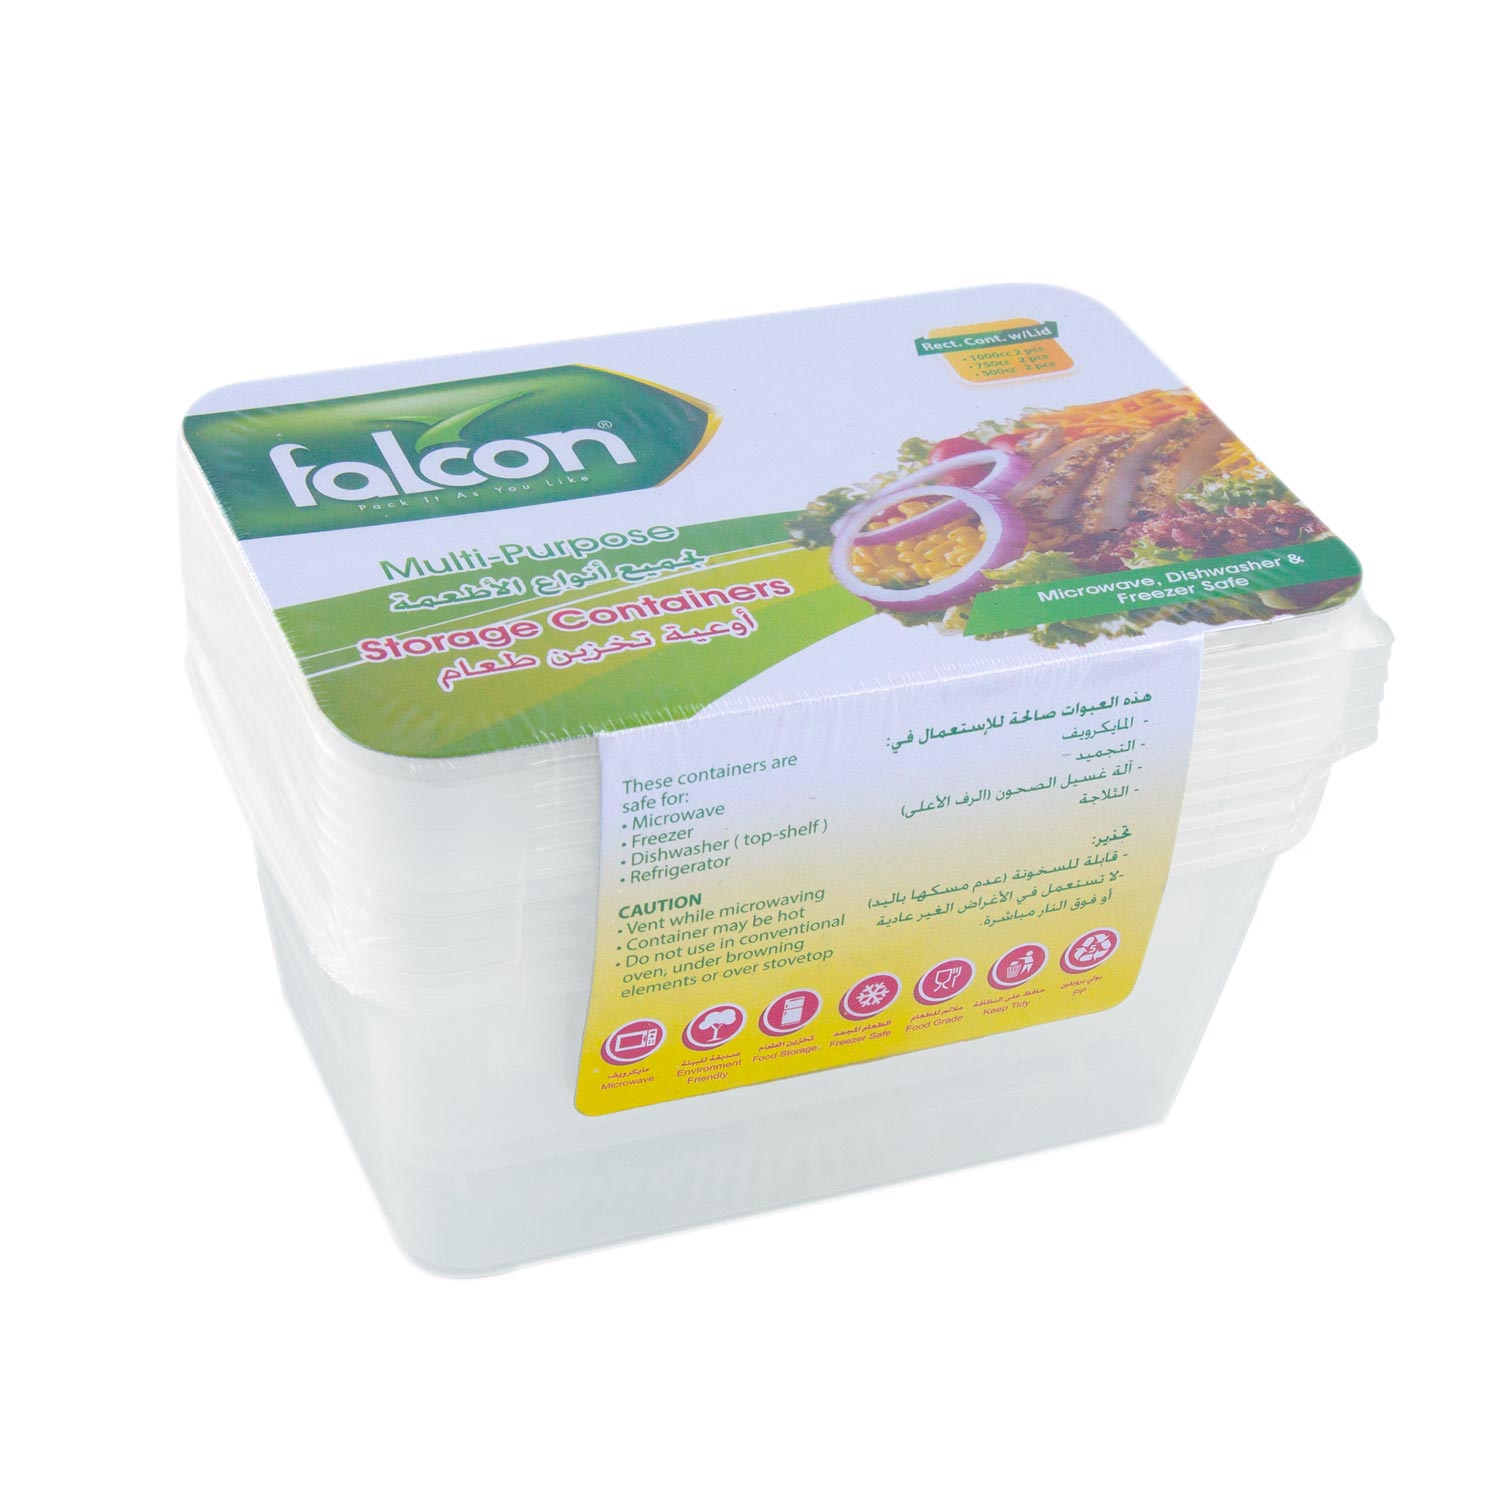 Microwave Containers Combo Pack of 3 Sizes (500cc, 750cc, 1000cc), 6 Packs with 30 pieces in each.